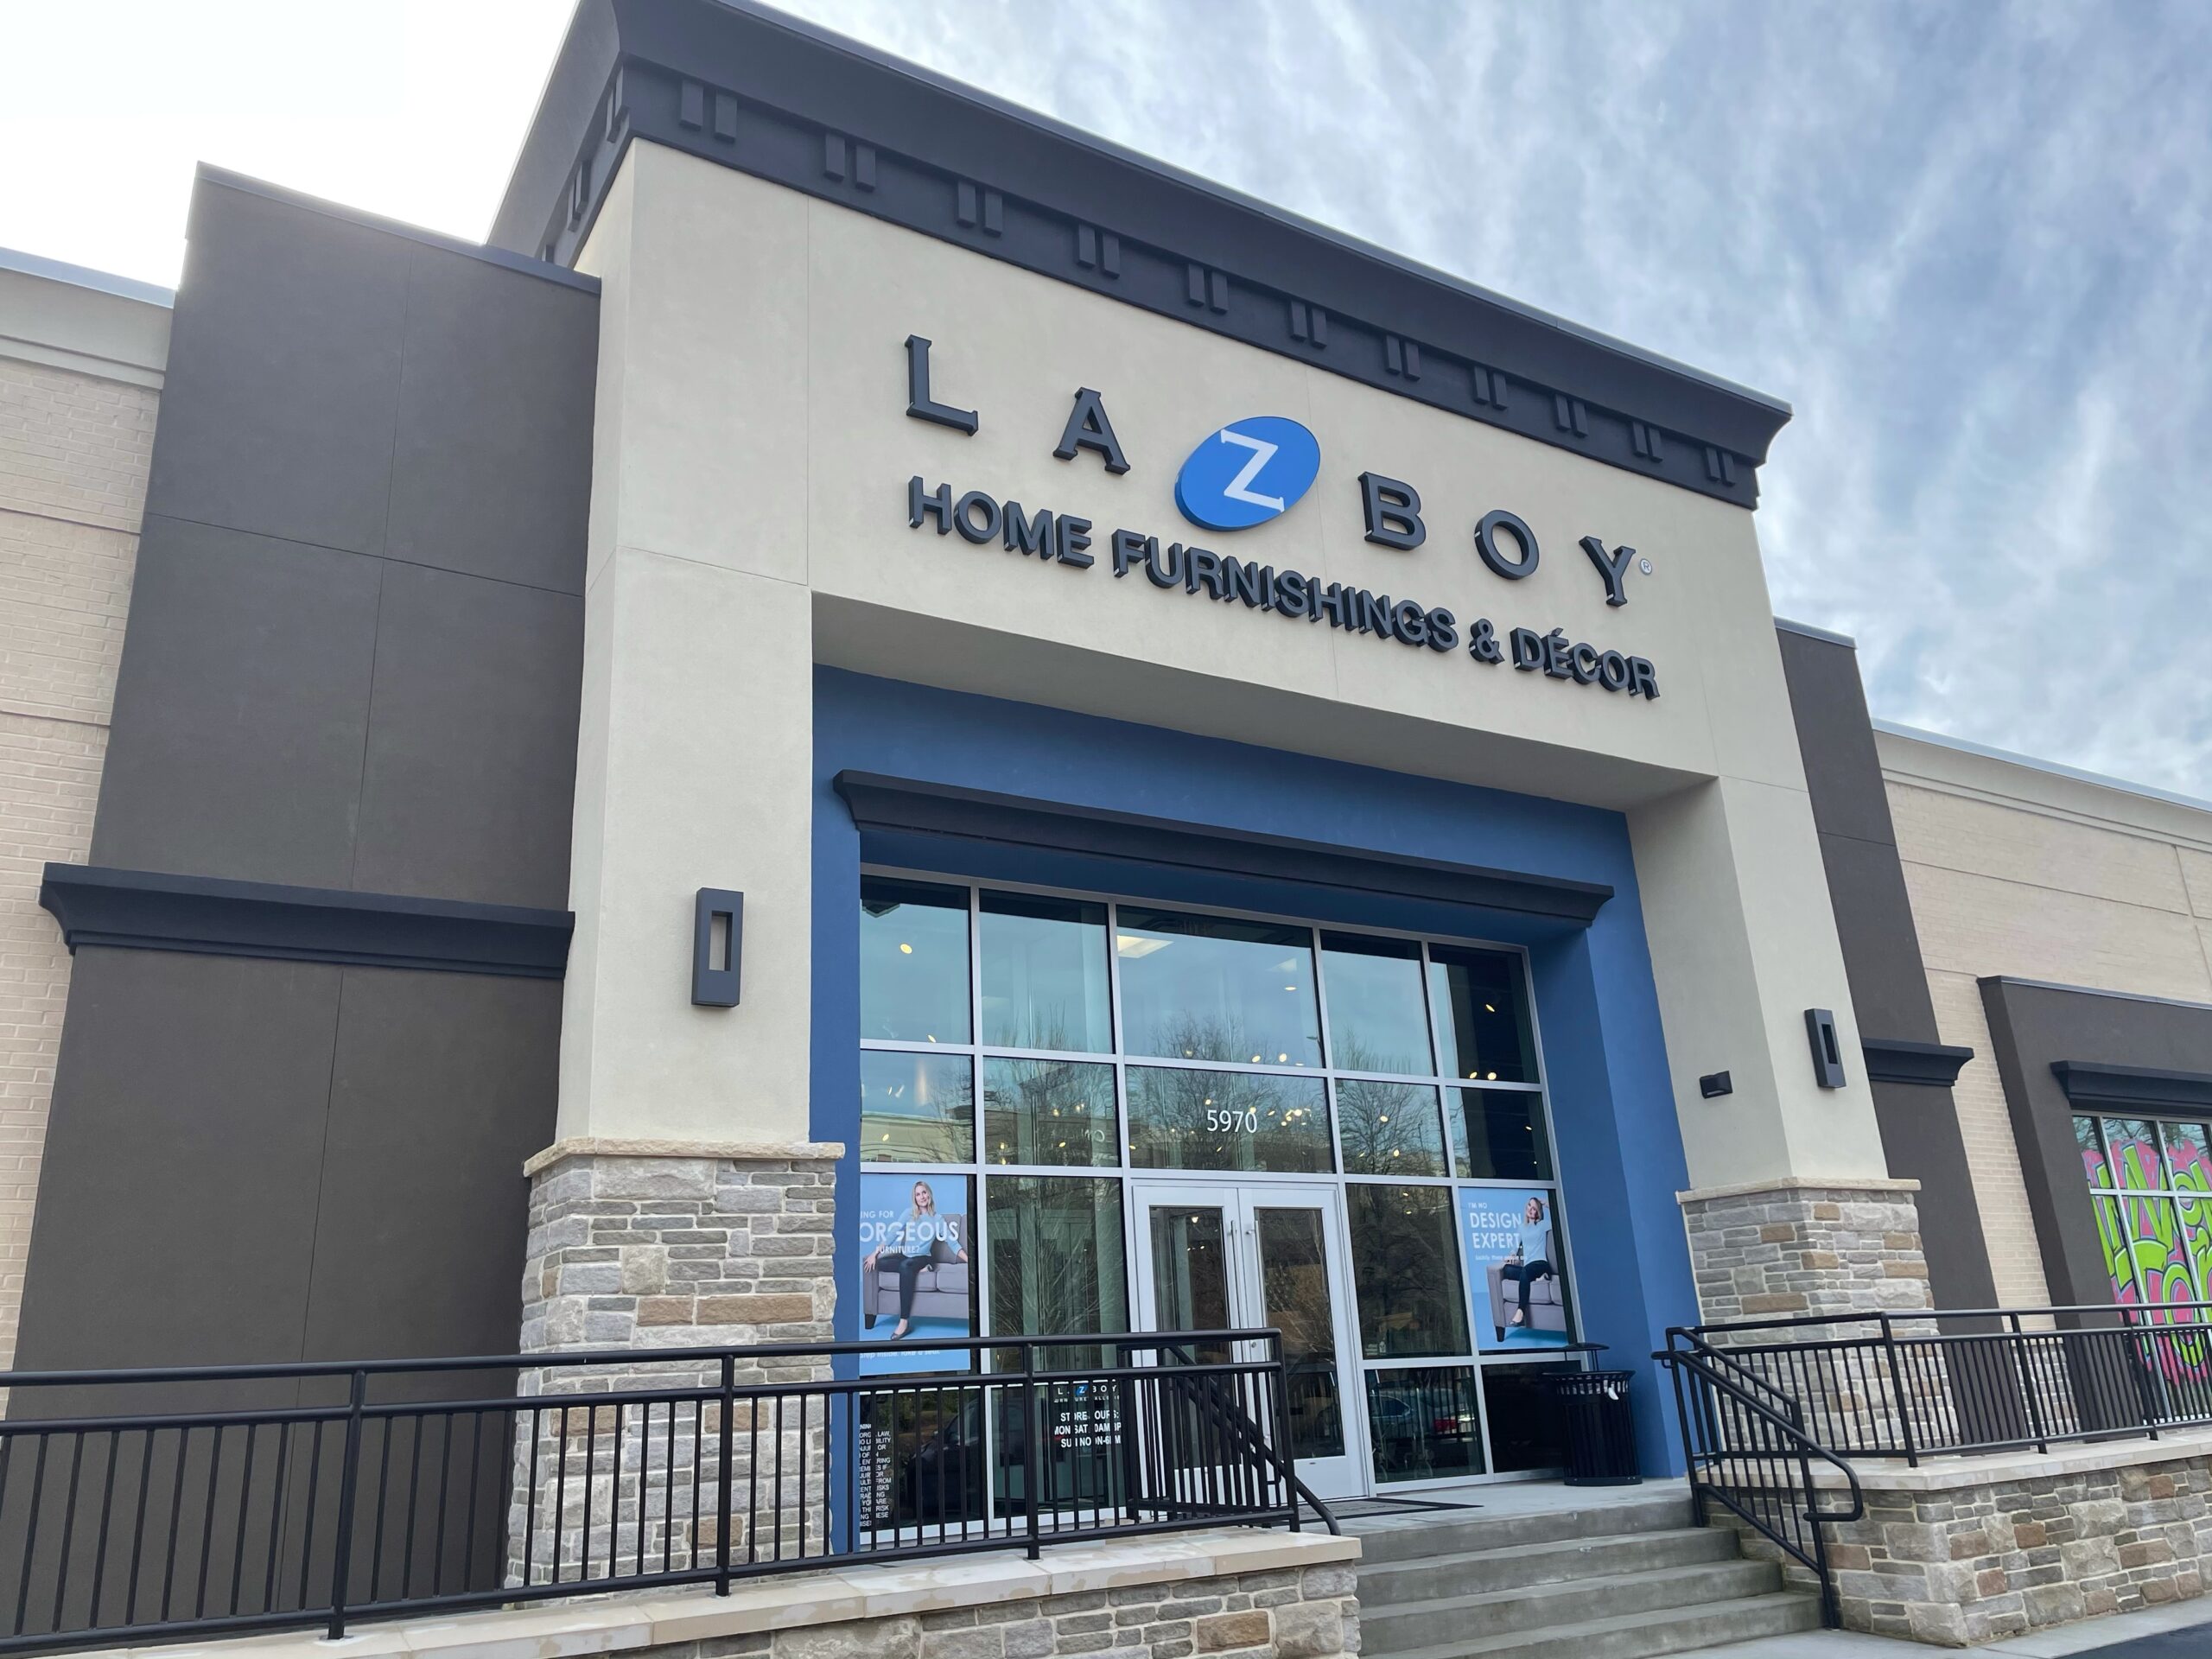 $16,250,000 Sale Completed for Two La-Z-Boy Showrooms 1